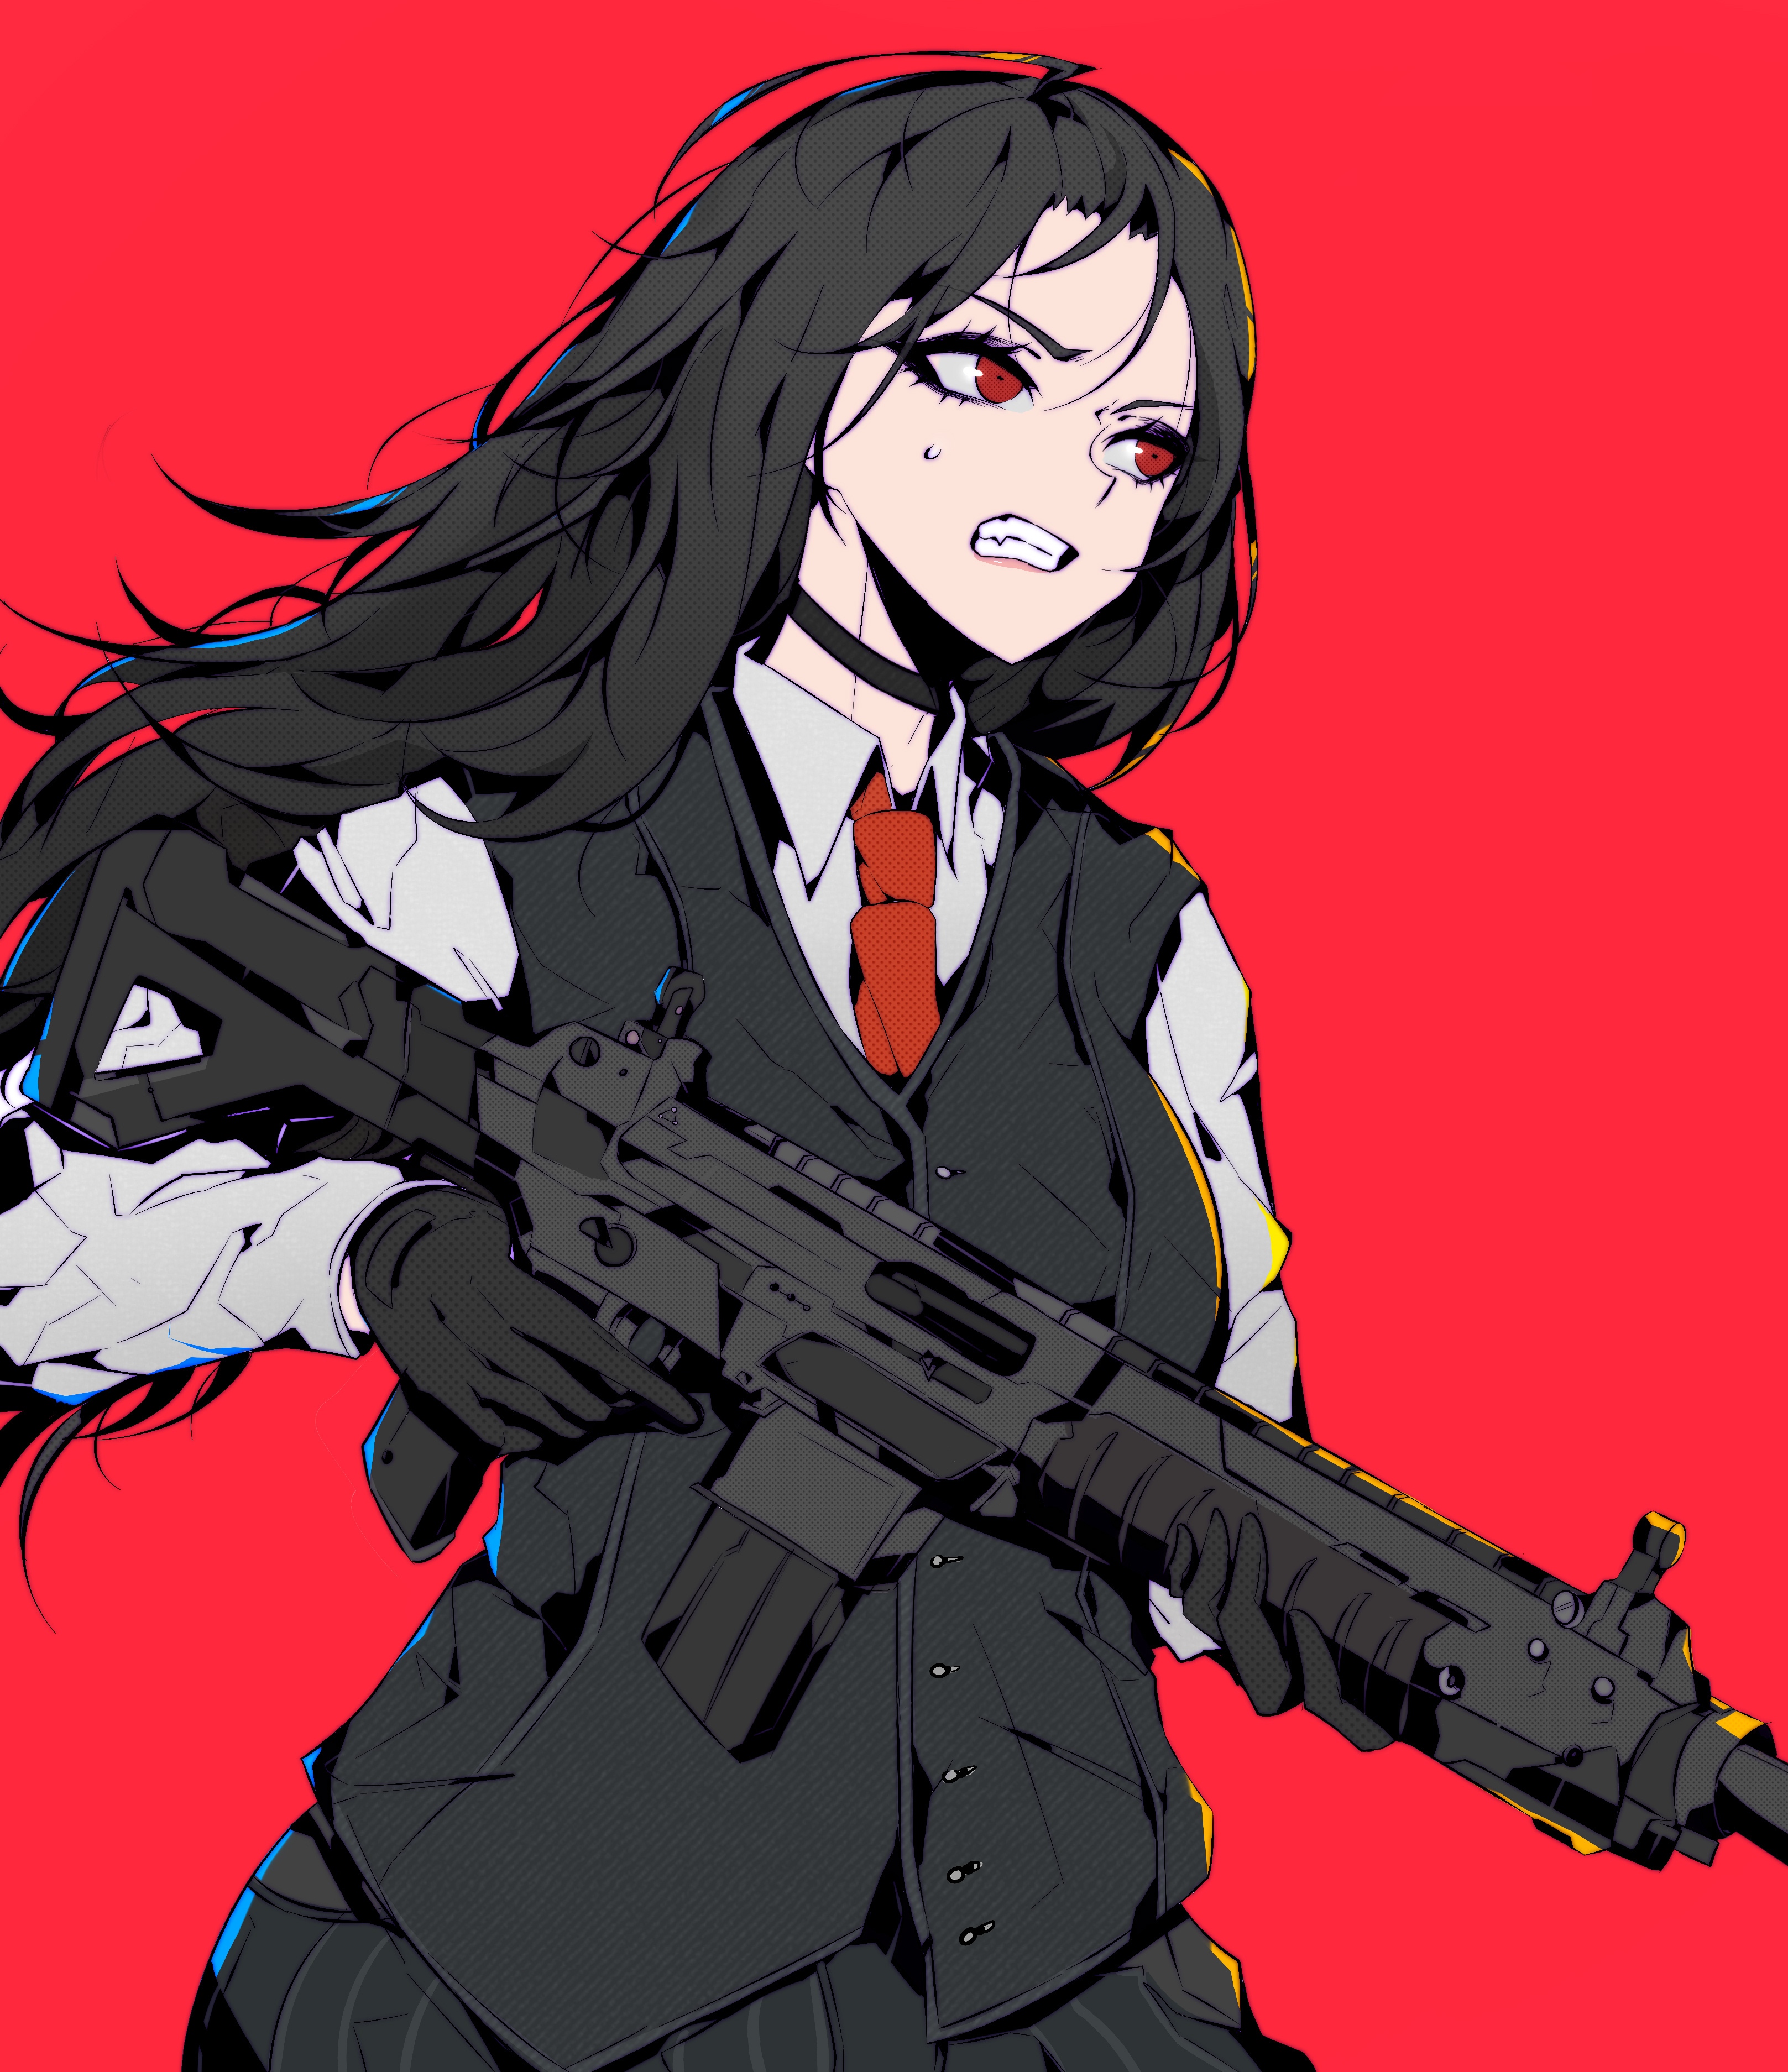 Red Eyes Red Background Black Hair Angry Long Hair Weapon Rifles Gun Red Tie White Shirt Anime Girls 3234x3748